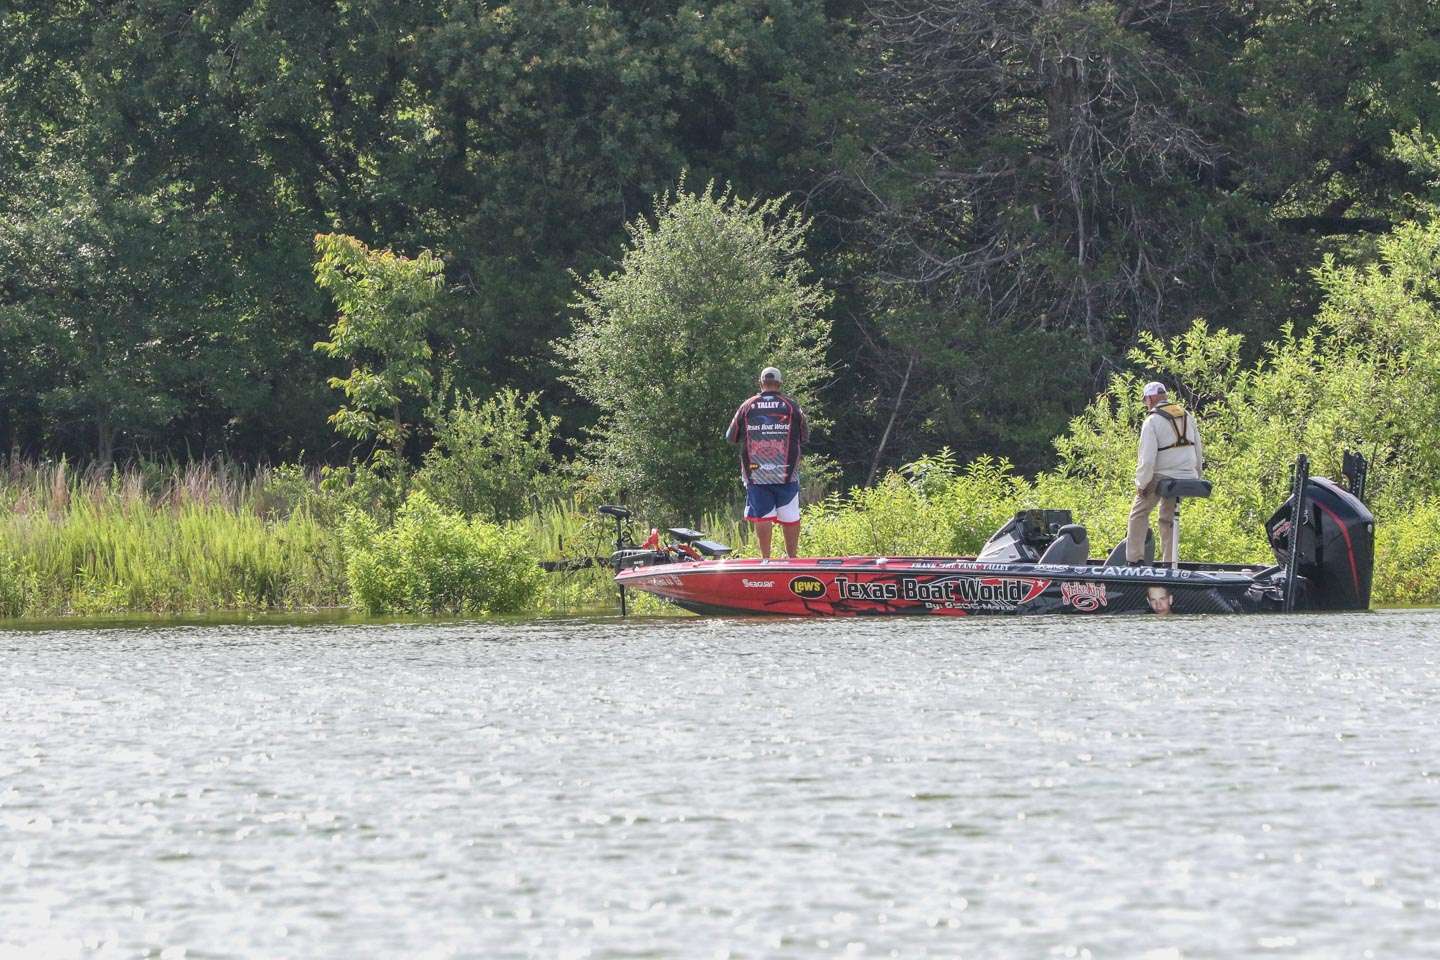 Head out with Frank Talley, Chris Jones, and Hank Cherry as they get to work on Day 1 of the 2021 Academy Sports + Outdoors Bassmaster Classic presented by Huk!